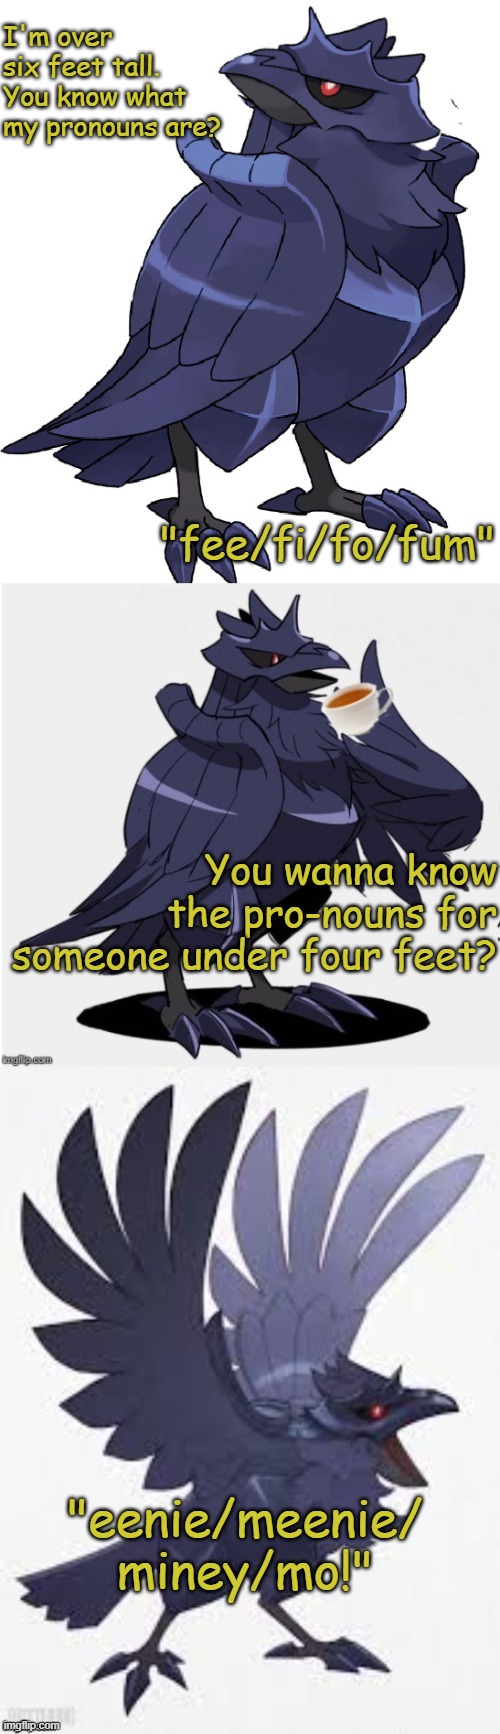 Civilized Dark Humor Bird is Civilized. | I'm over six feet tall. You know what my pronouns are? "fee/fi/fo/fum"; You wanna know the pro-nouns for someone under four feet? "eenie/meenie/
miney/mo!" | image tagged in bad pun ttdc,dark humor,pronouns,lol,memes,funny | made w/ Imgflip meme maker